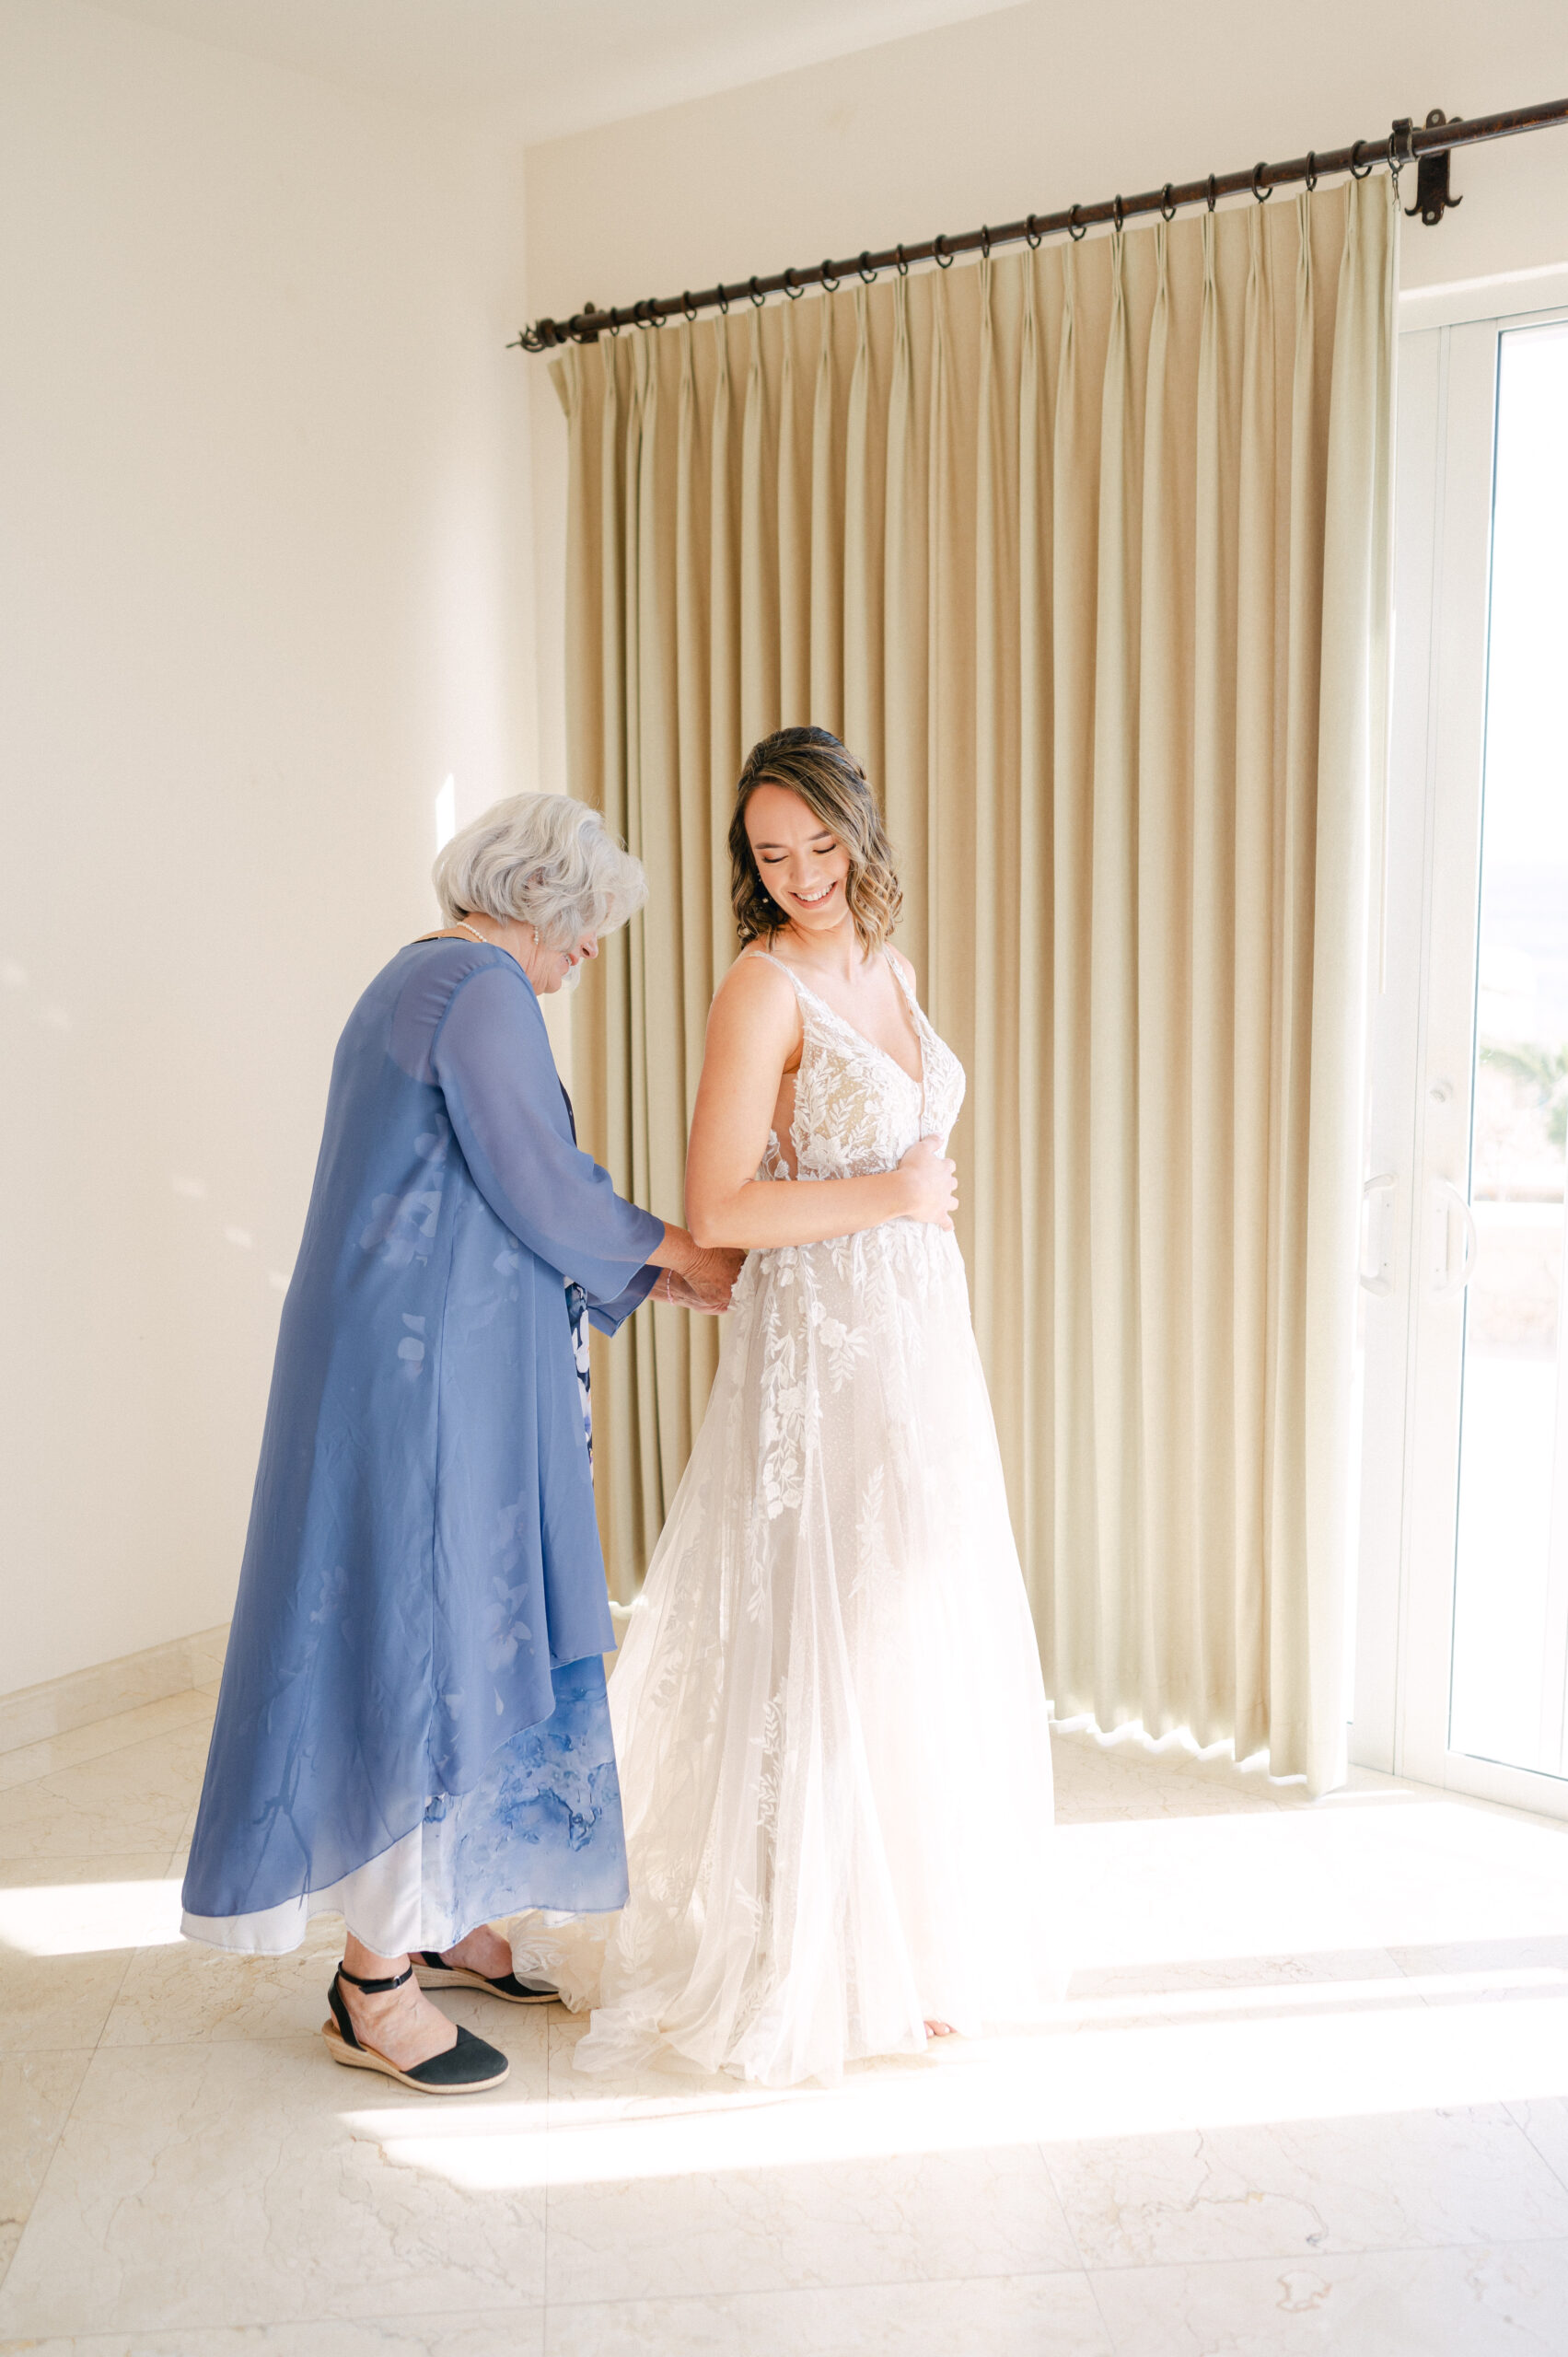 Mother of the bride helping her daughter into her daughter's wedding dress.